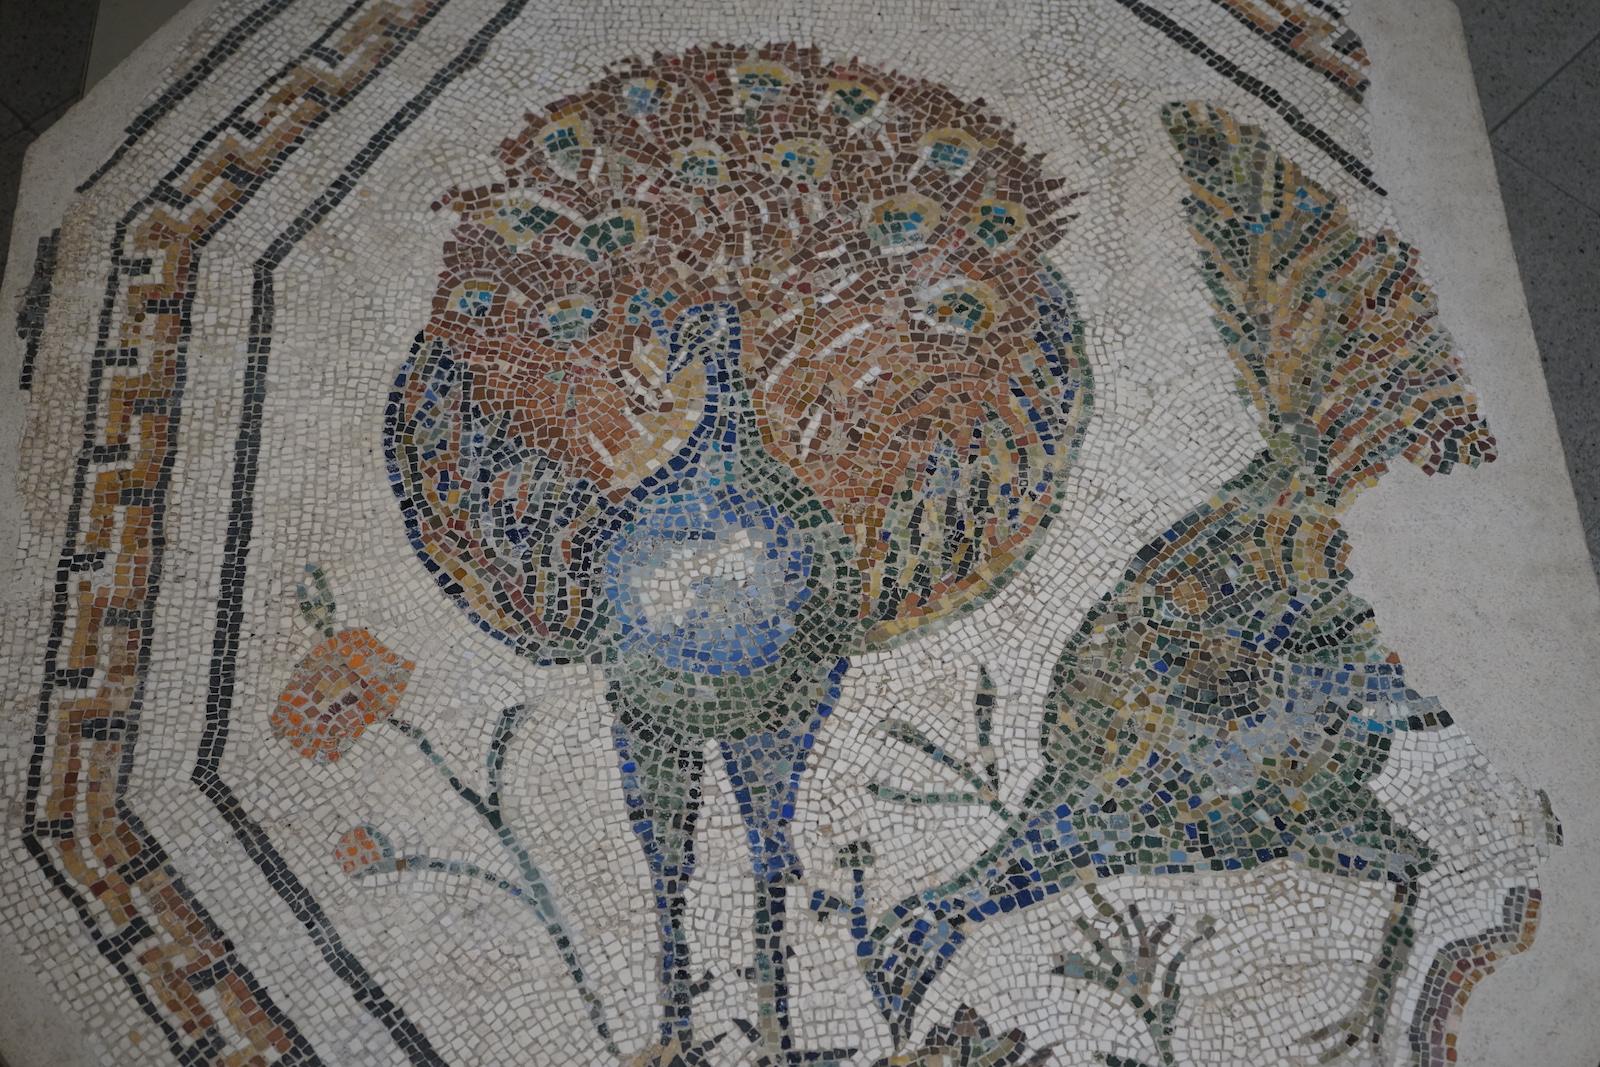 5 b Mosaic of peacocks from a 2nd century AD tomb